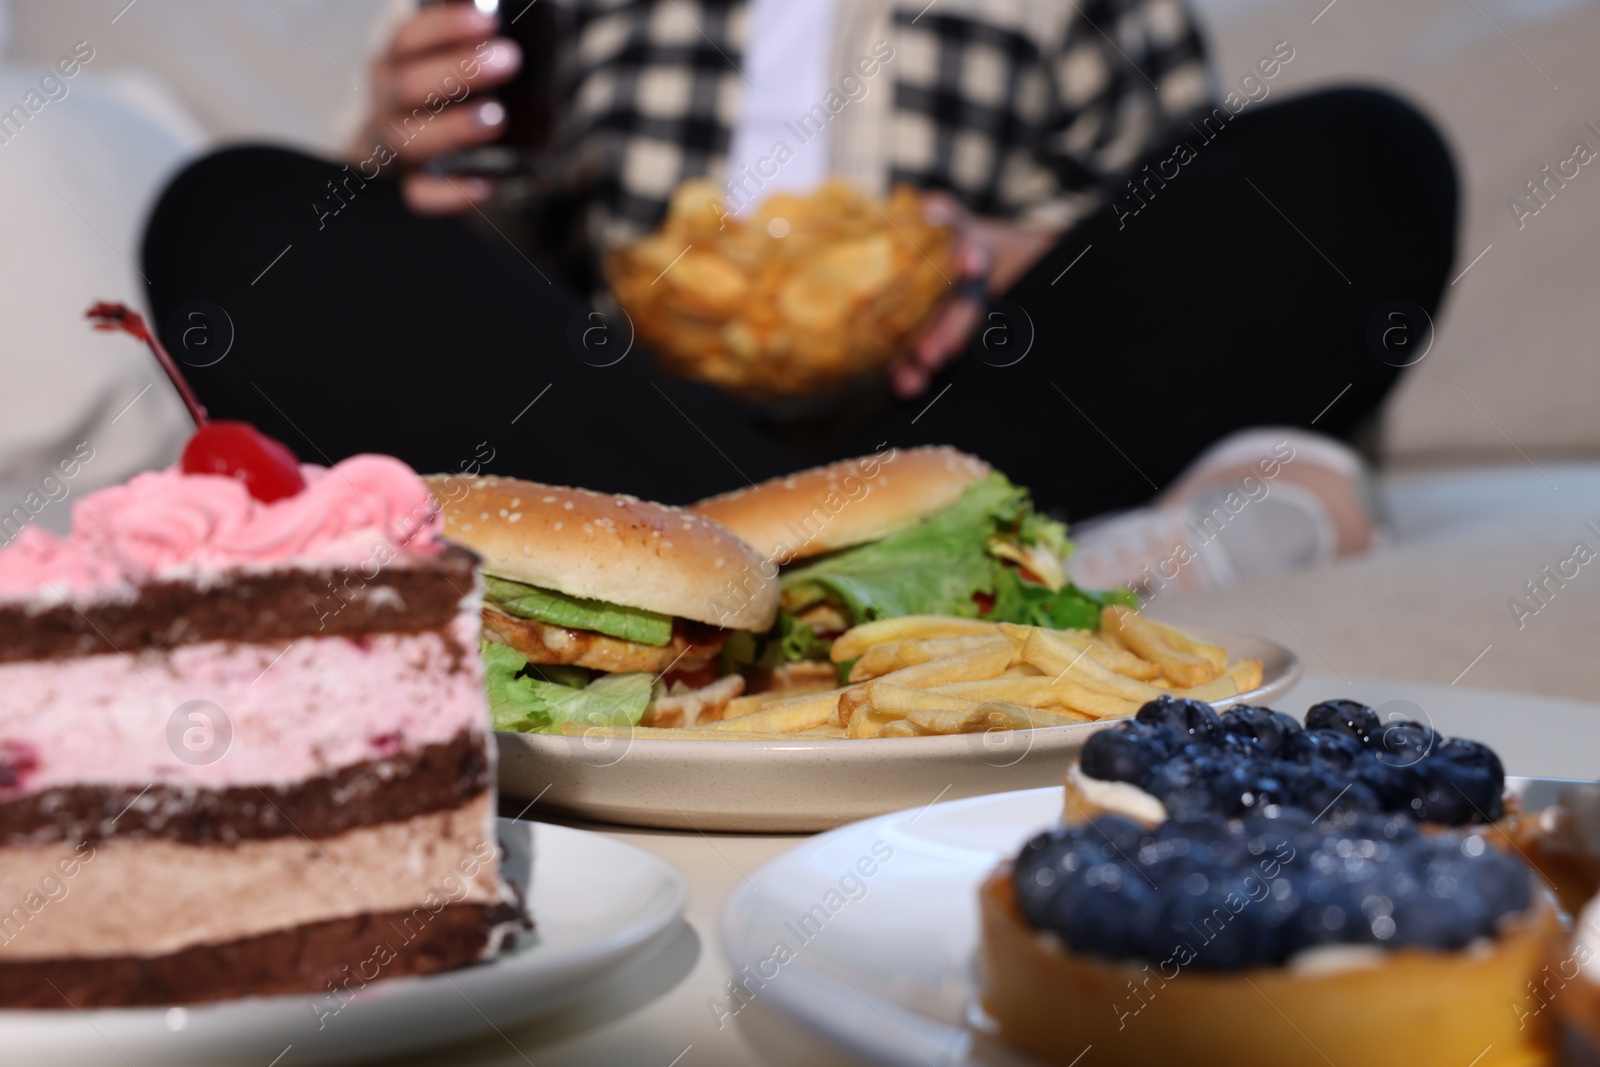 Photo of Overweight woman with chips, focus on unhealthy food